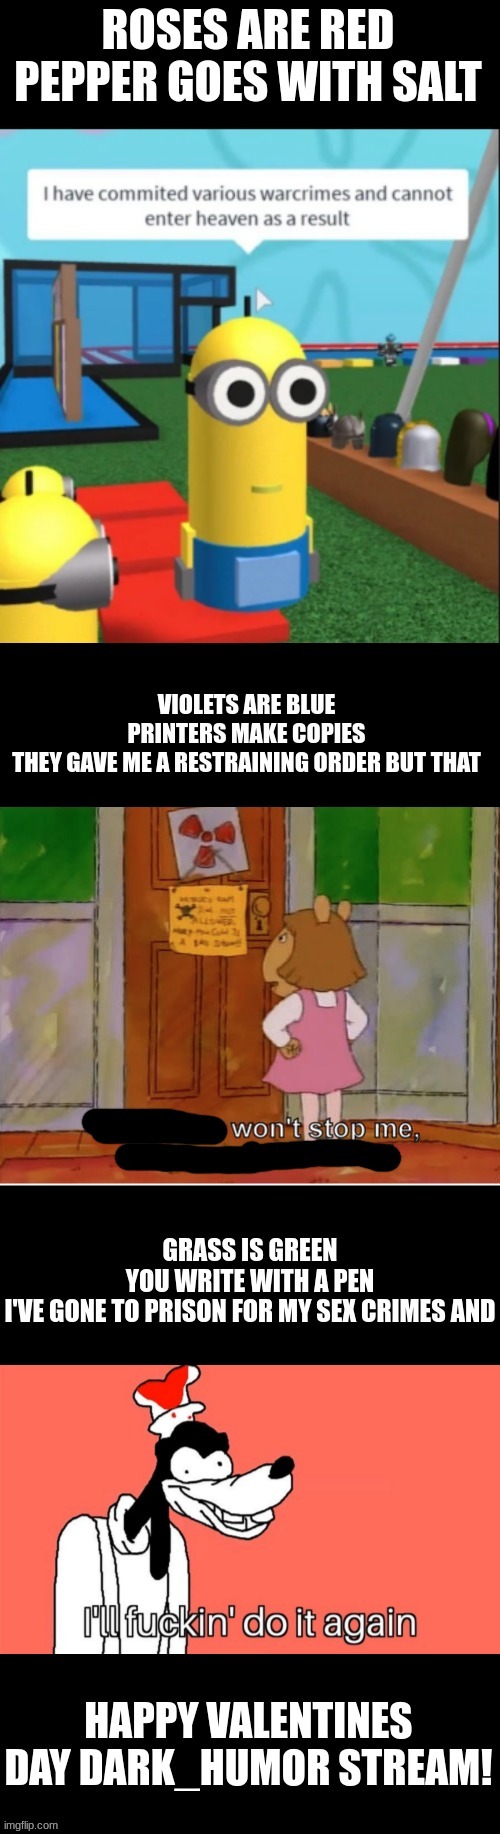 A valentines poem | image tagged in dark humor,poem,funny,memes,ive done terrible things,valentines | made w/ Imgflip meme maker